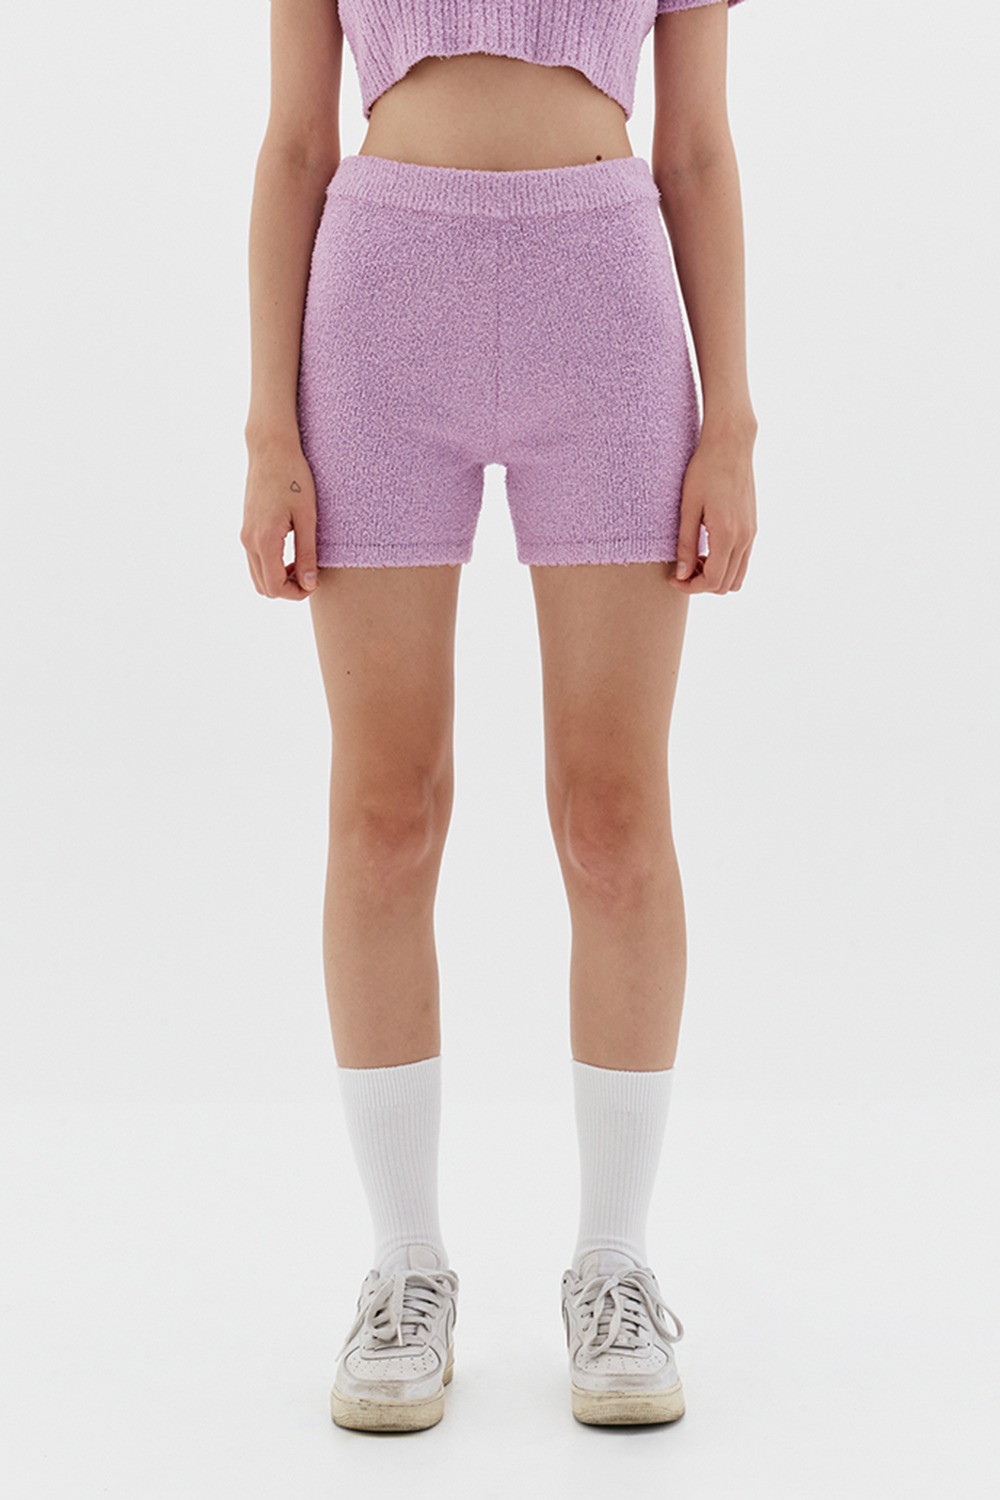 FLUFFY KNITTED SHORTS - VIOLET